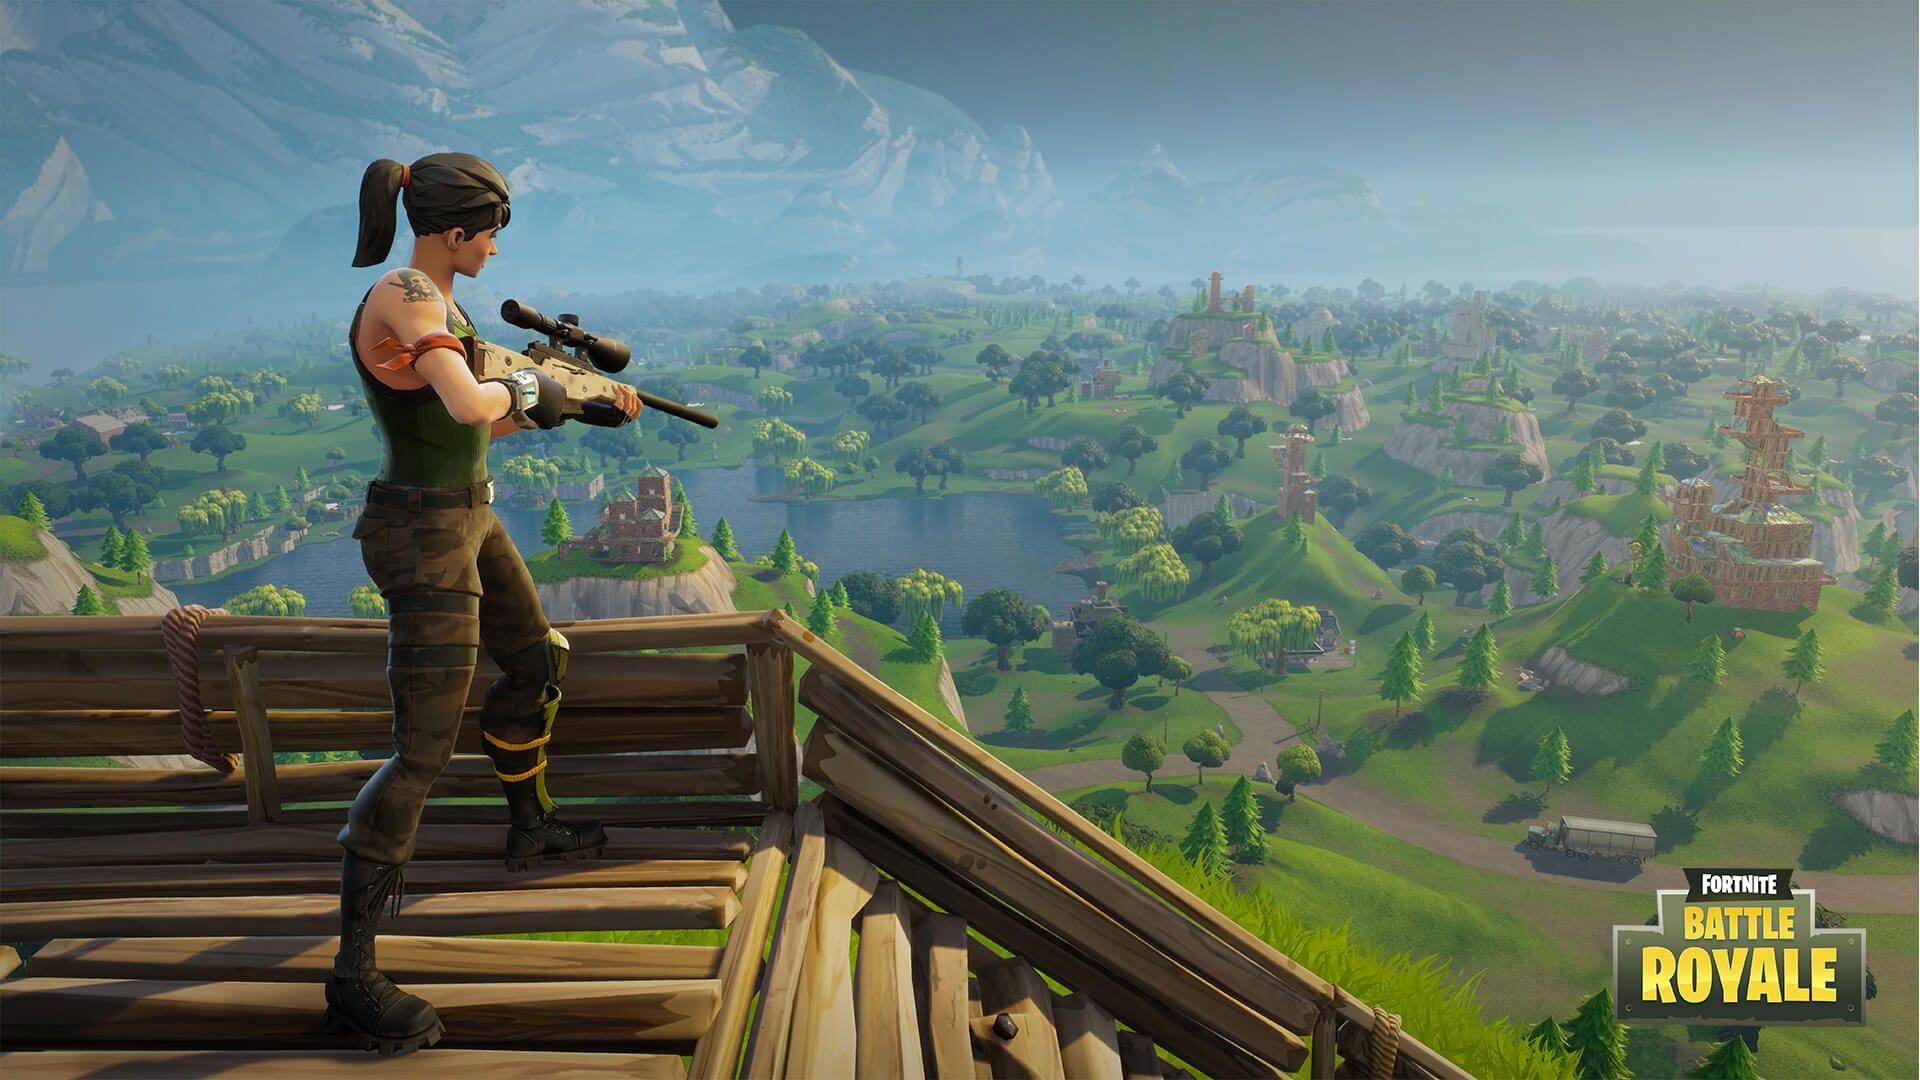 Fortnite Battle Royale Officially Out Now and Free To Play